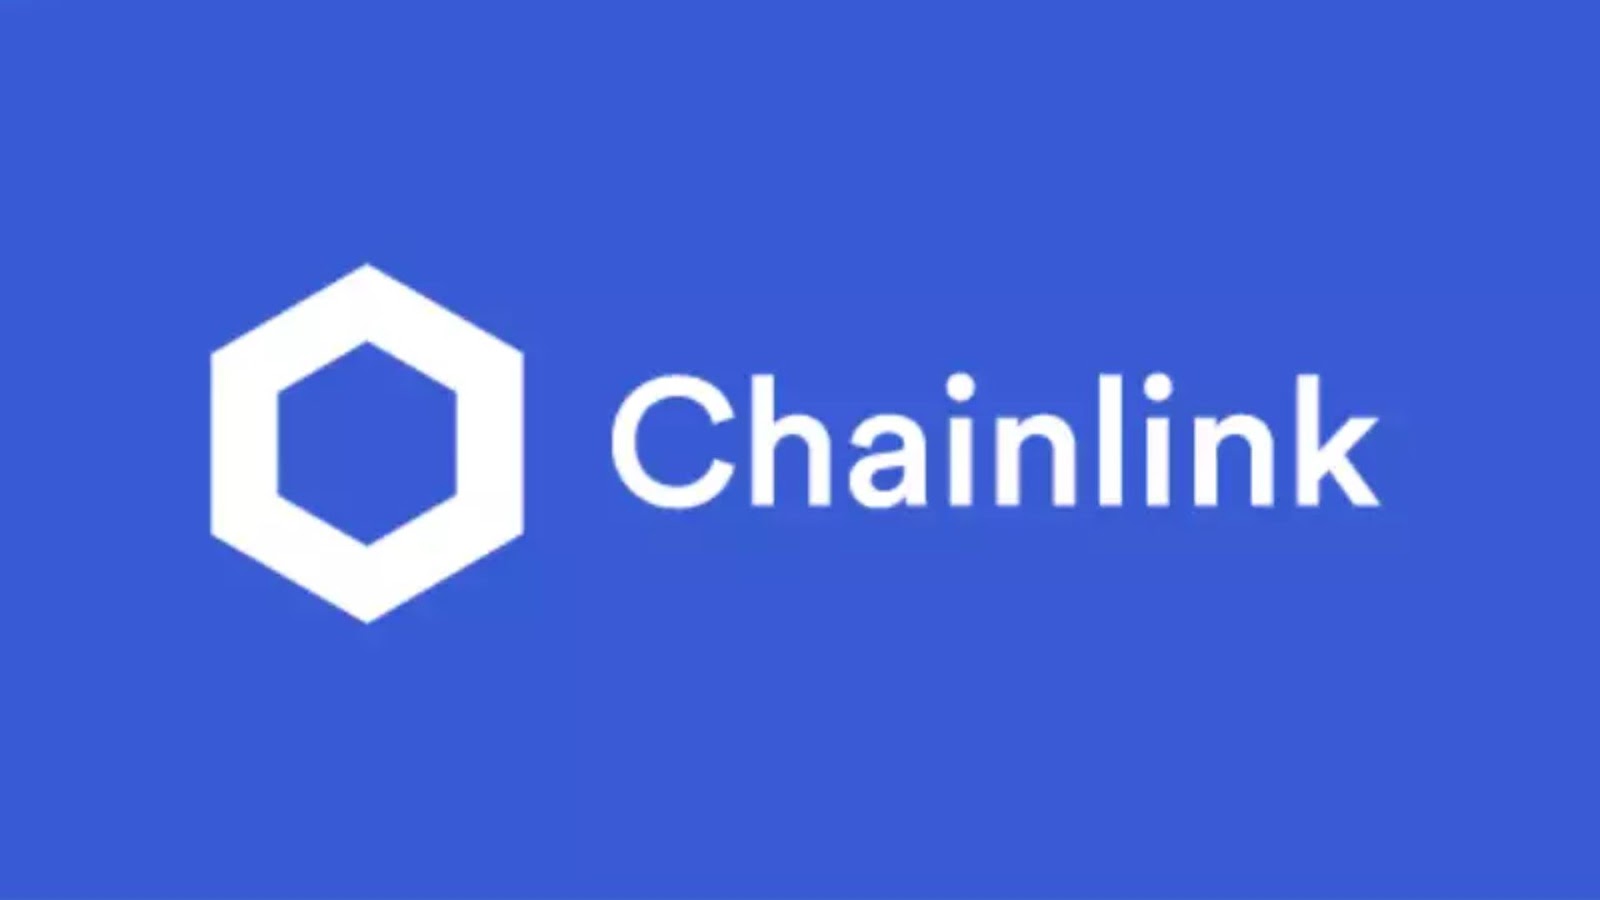 Price Speculation Soars as Chainlink’s (LINK) Security Reaches $23.5B